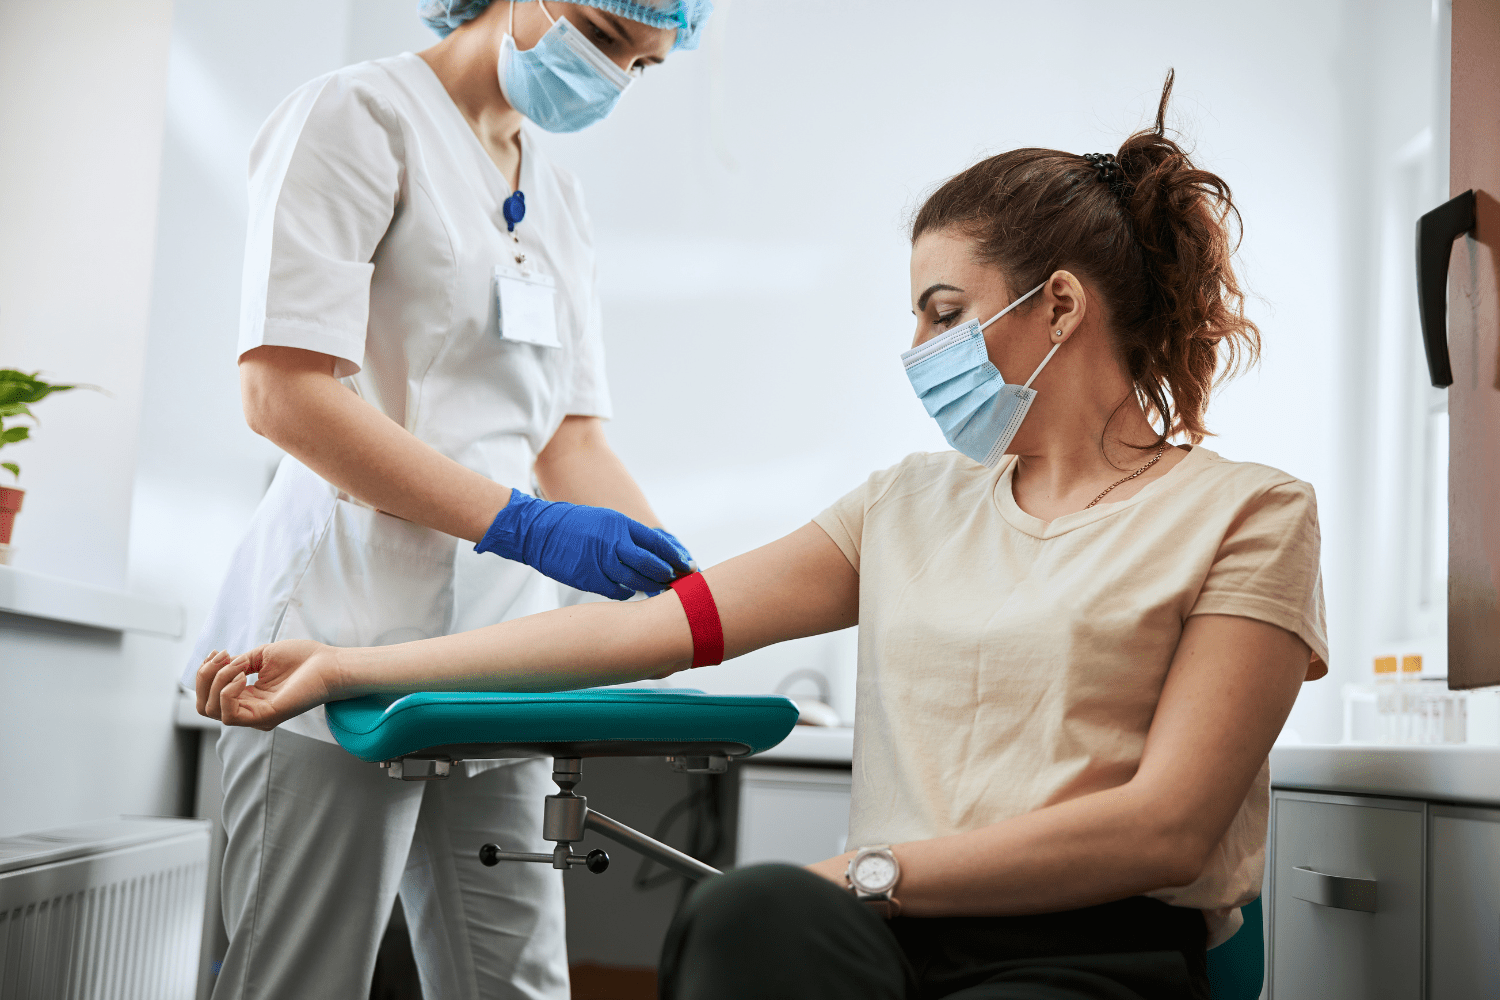 Woman in a beige shirt getting her blood drawn from a healthcare professional.